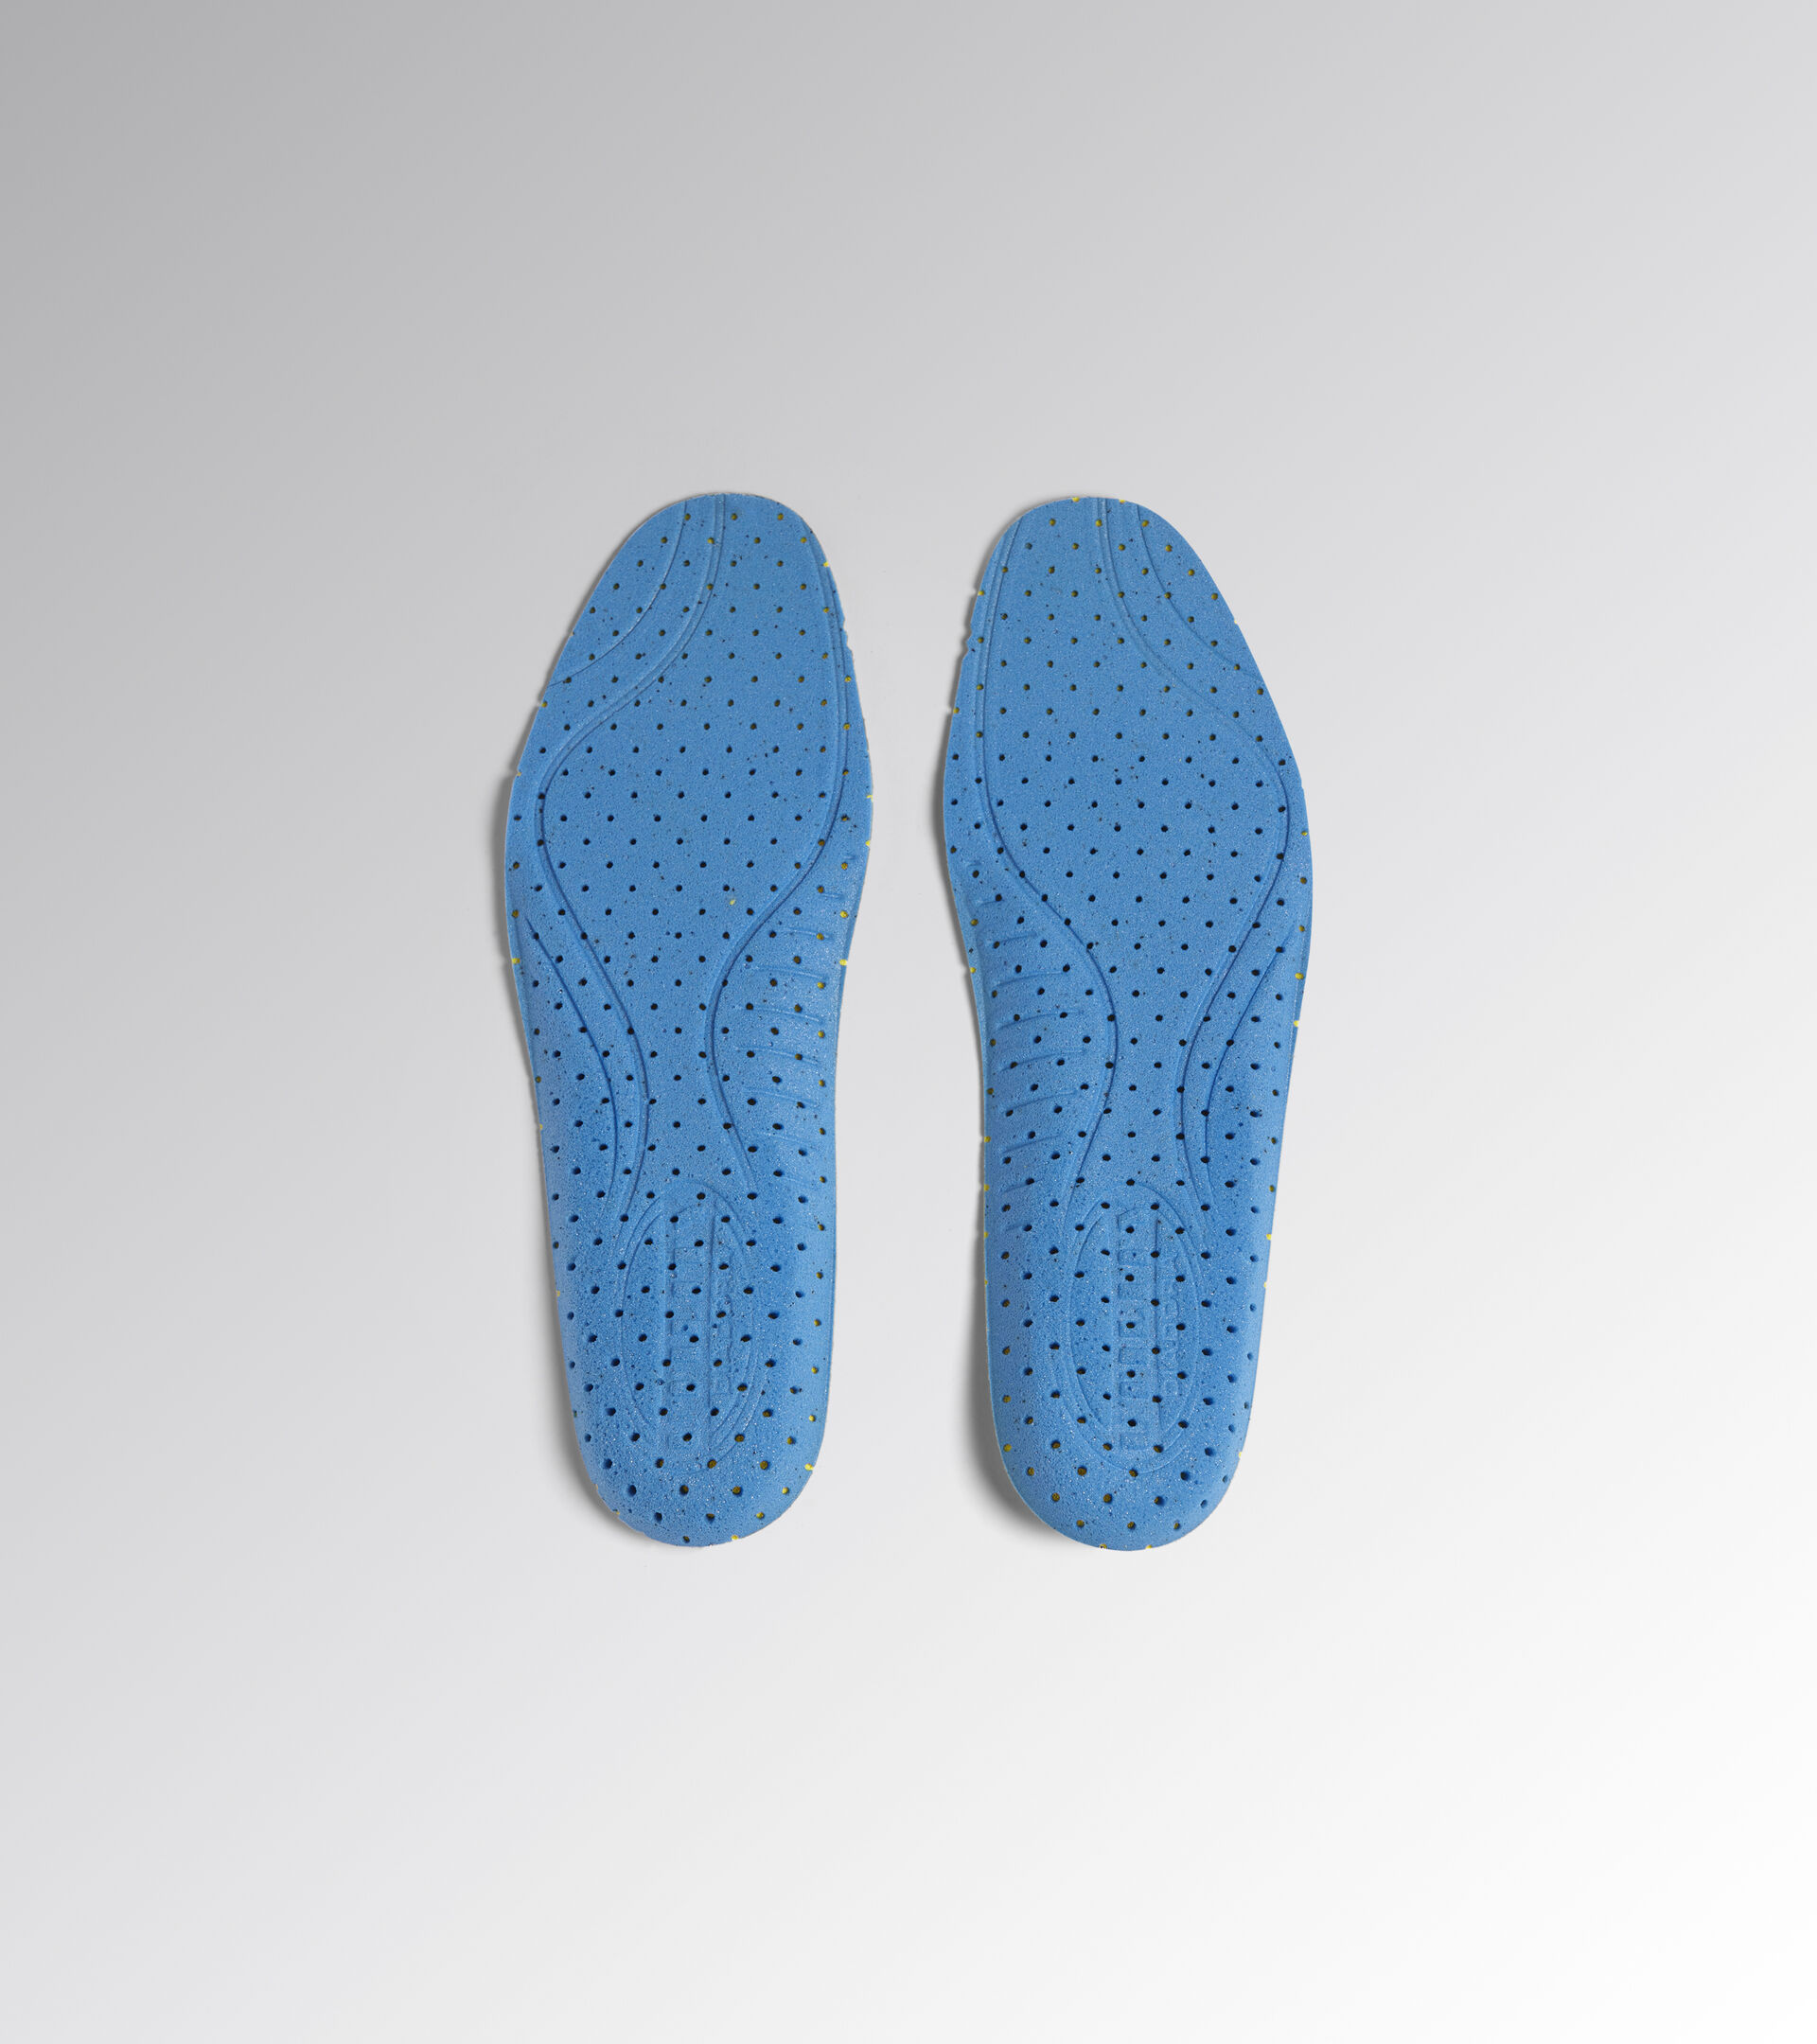 Insoles for Utility shoes INSOLE RUN PU FOAM YELLOW UTILITY/NAVY - Utility